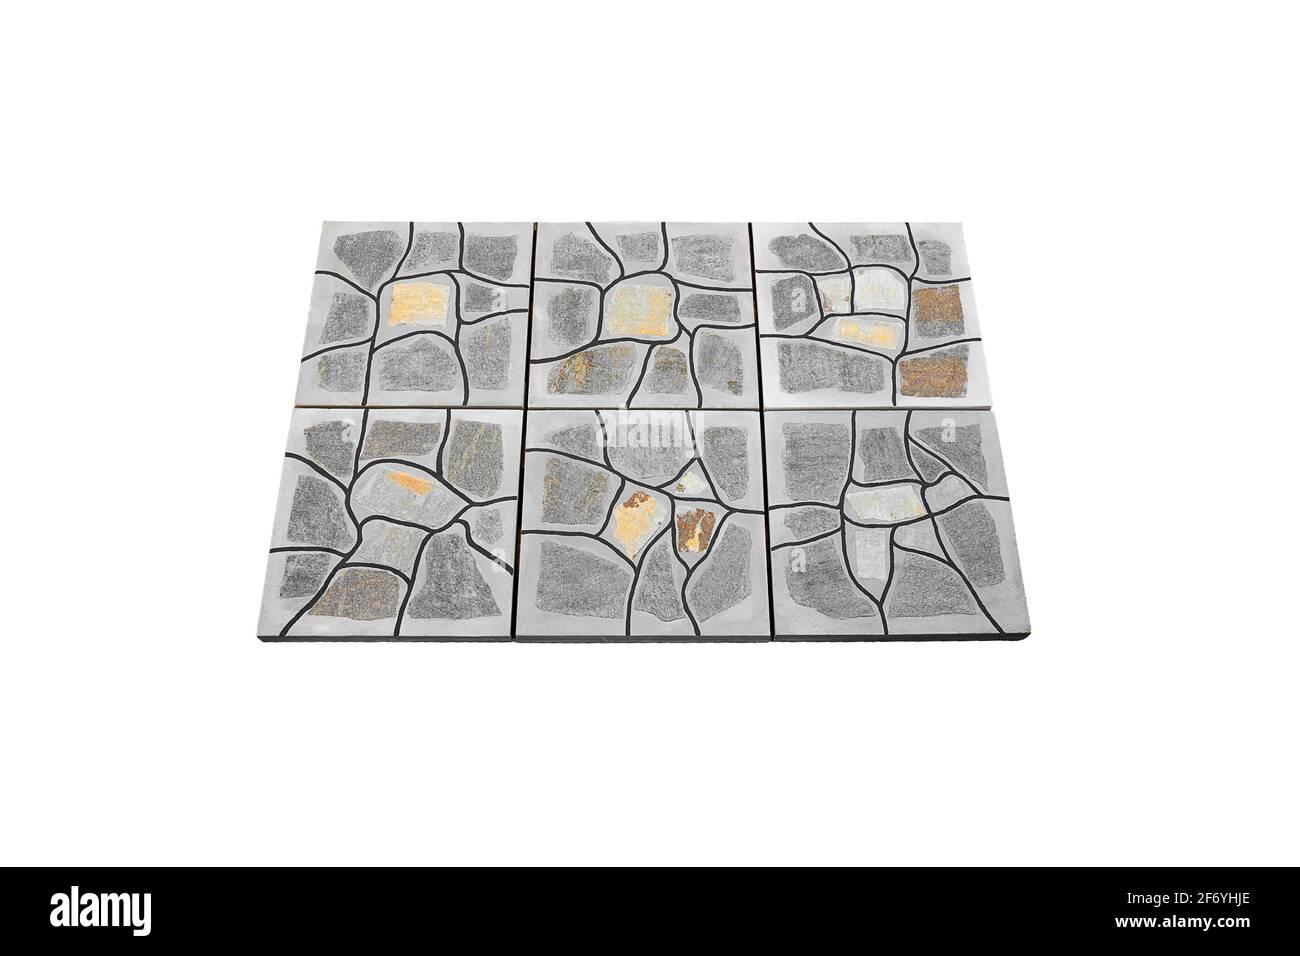 Grey Paving stone made of concrete isolated on white background. Tile has a flat upper surface without chamfer and fit snugly when paving. Stock Photo